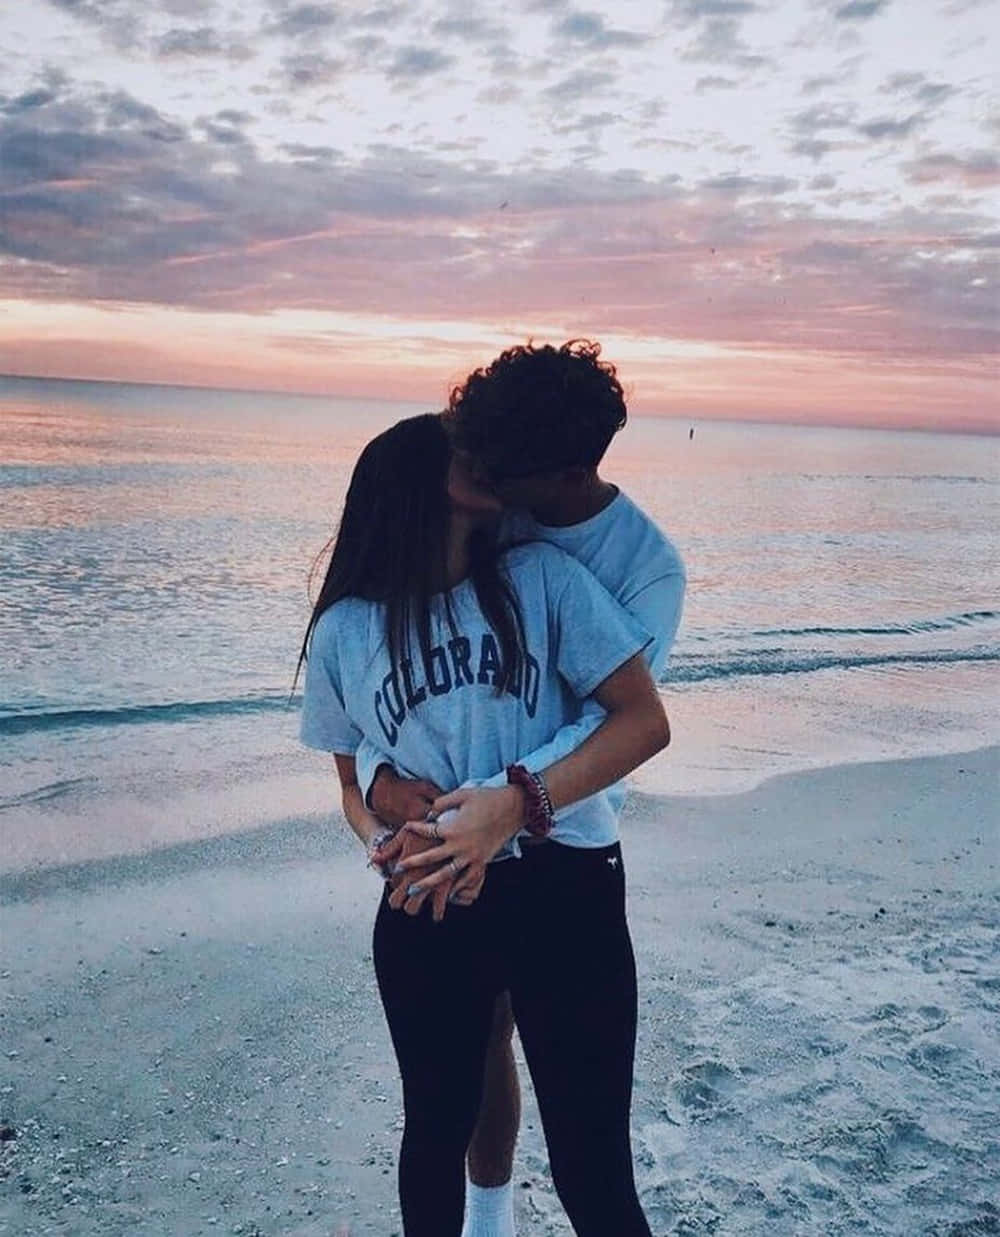 https://wallpapers.com/images/hd/cute-aesthetic-couple-pictures-ygbtl352gqvo0od2.jpg